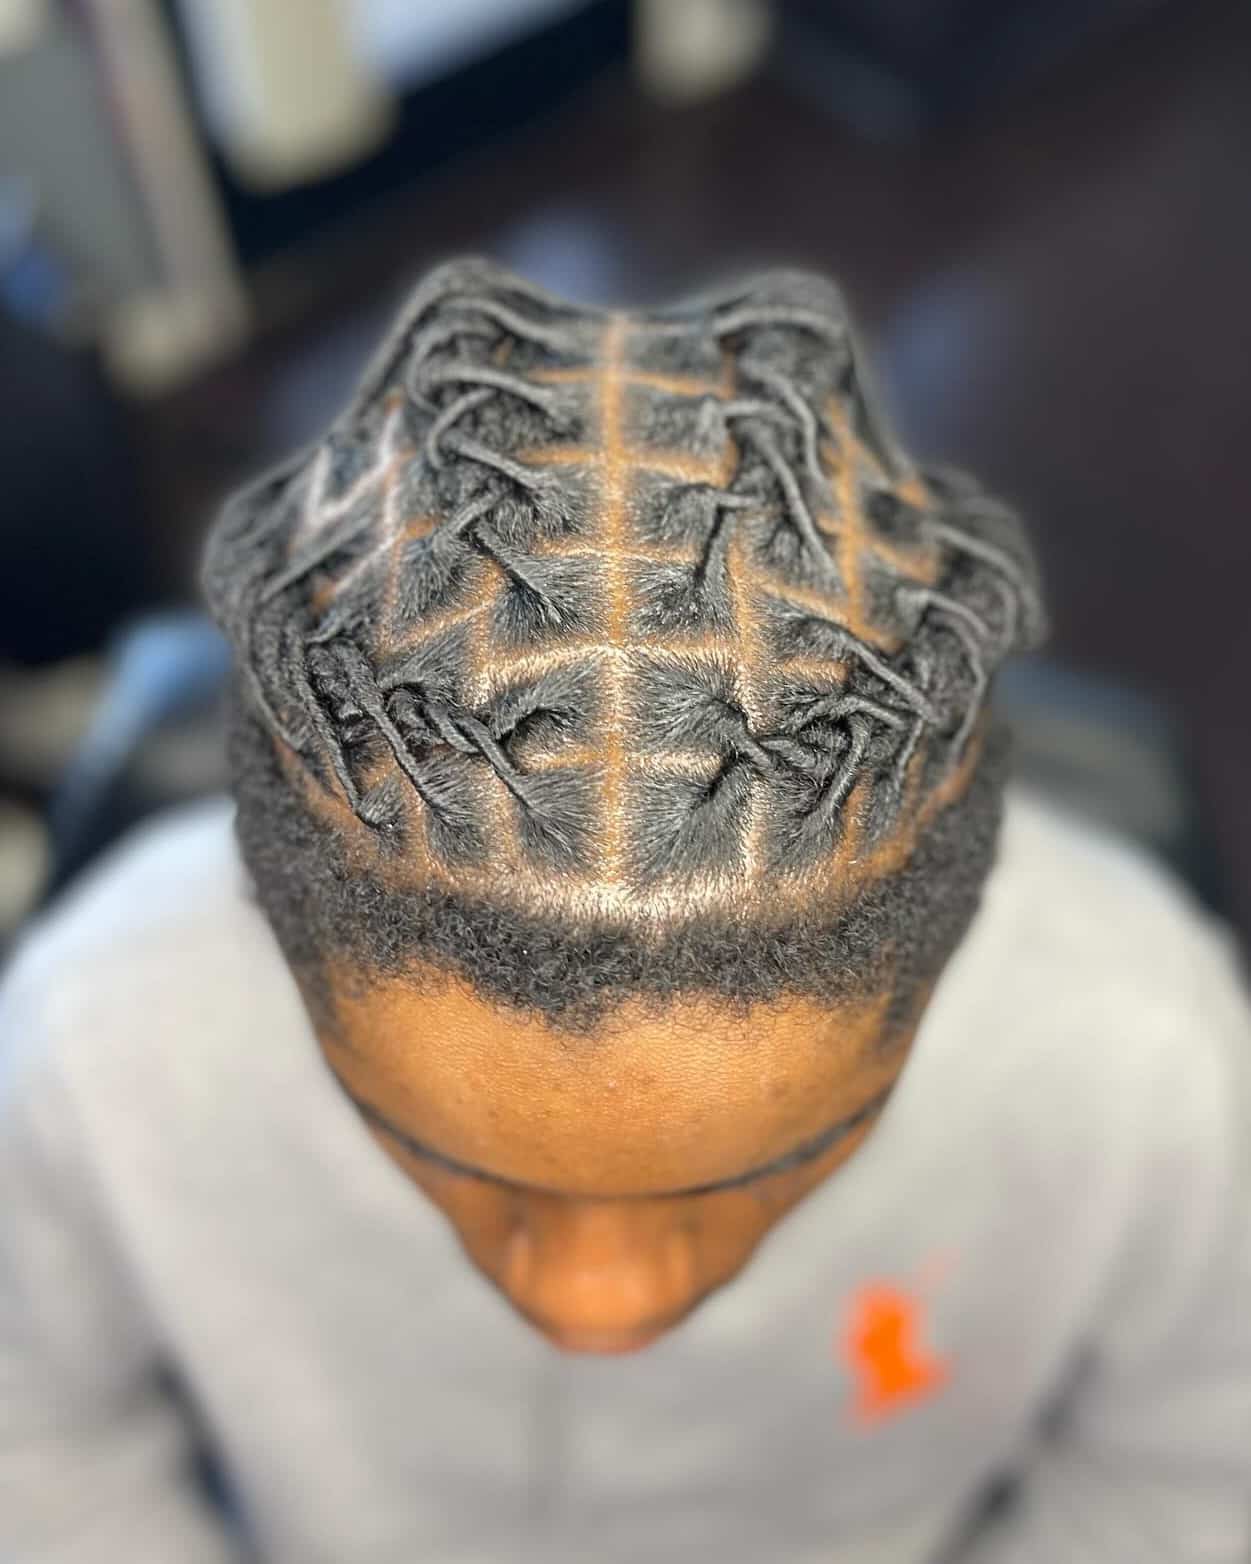 Image of 4 Barrel Twists inspired by Barrel Twist Hairstyles